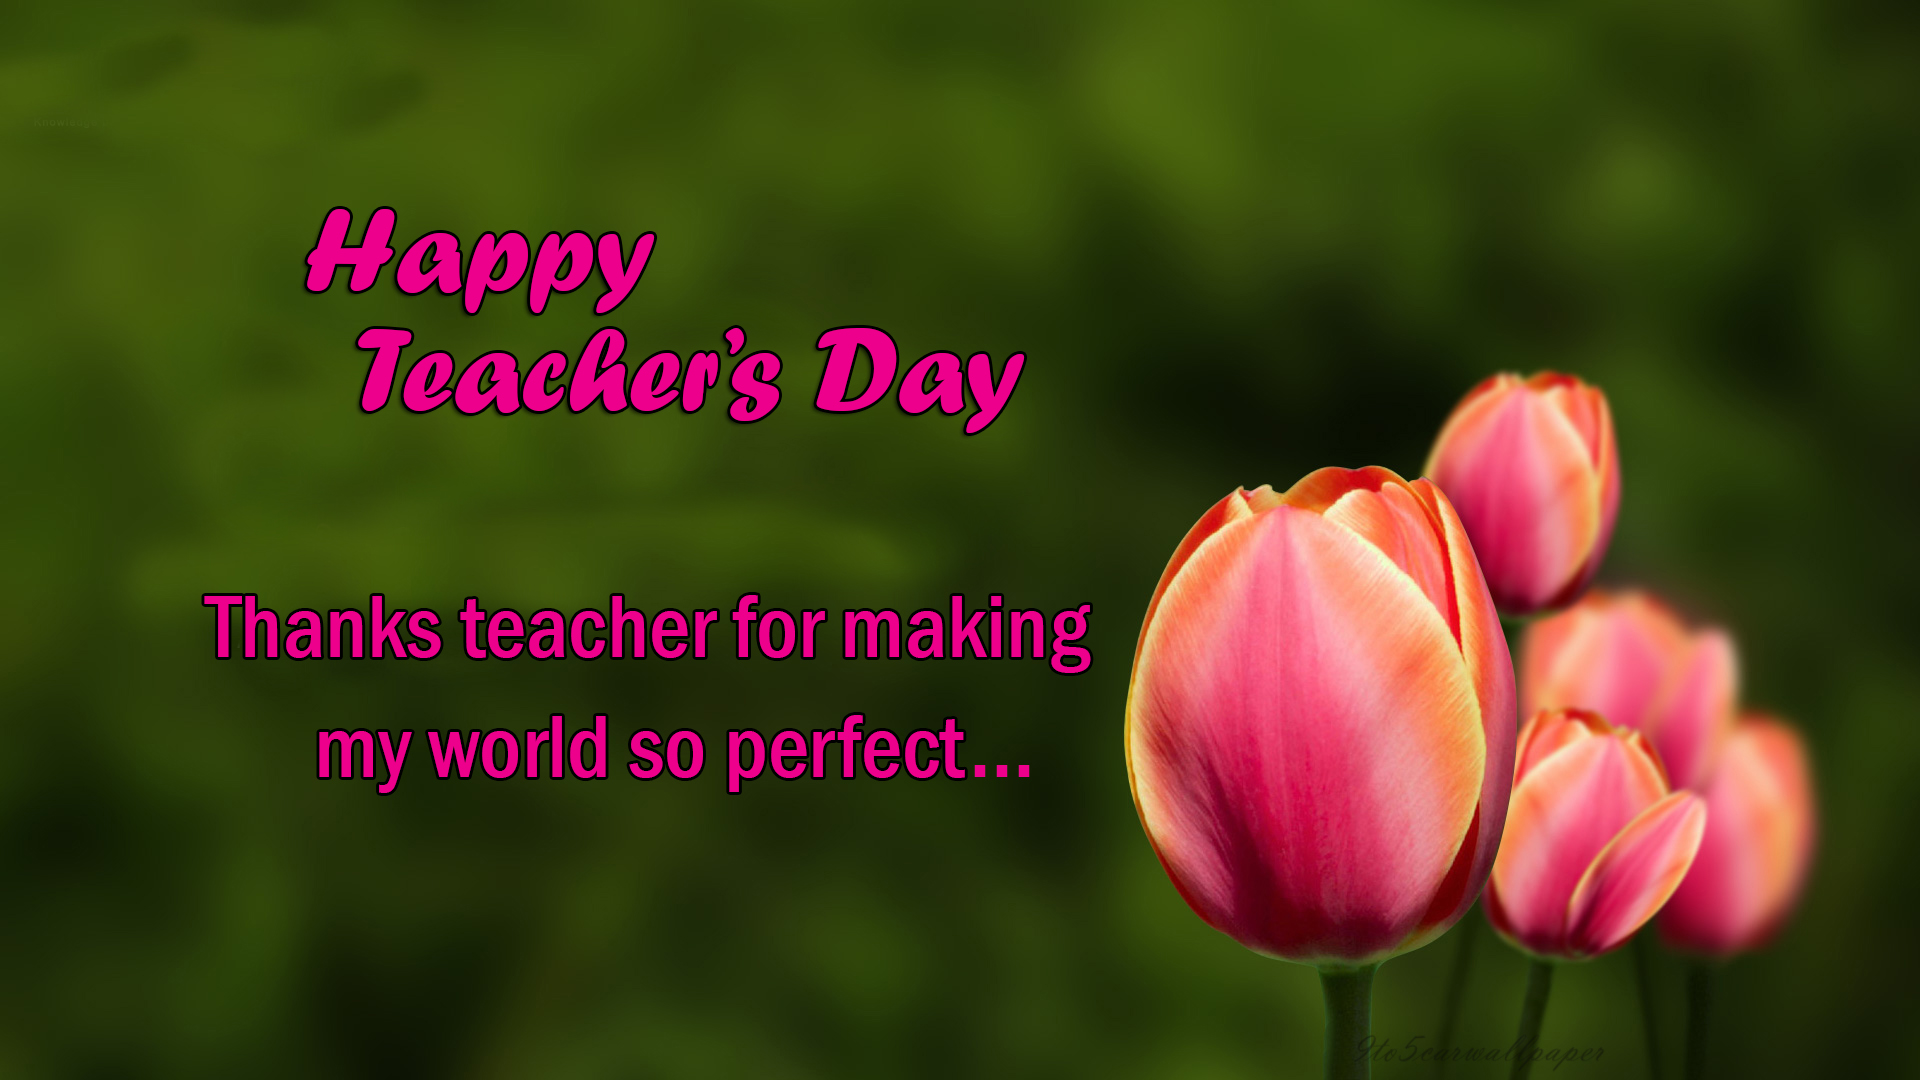 happy-teachers-day-sms-images-qoutes-wallpapers-wishes-2017